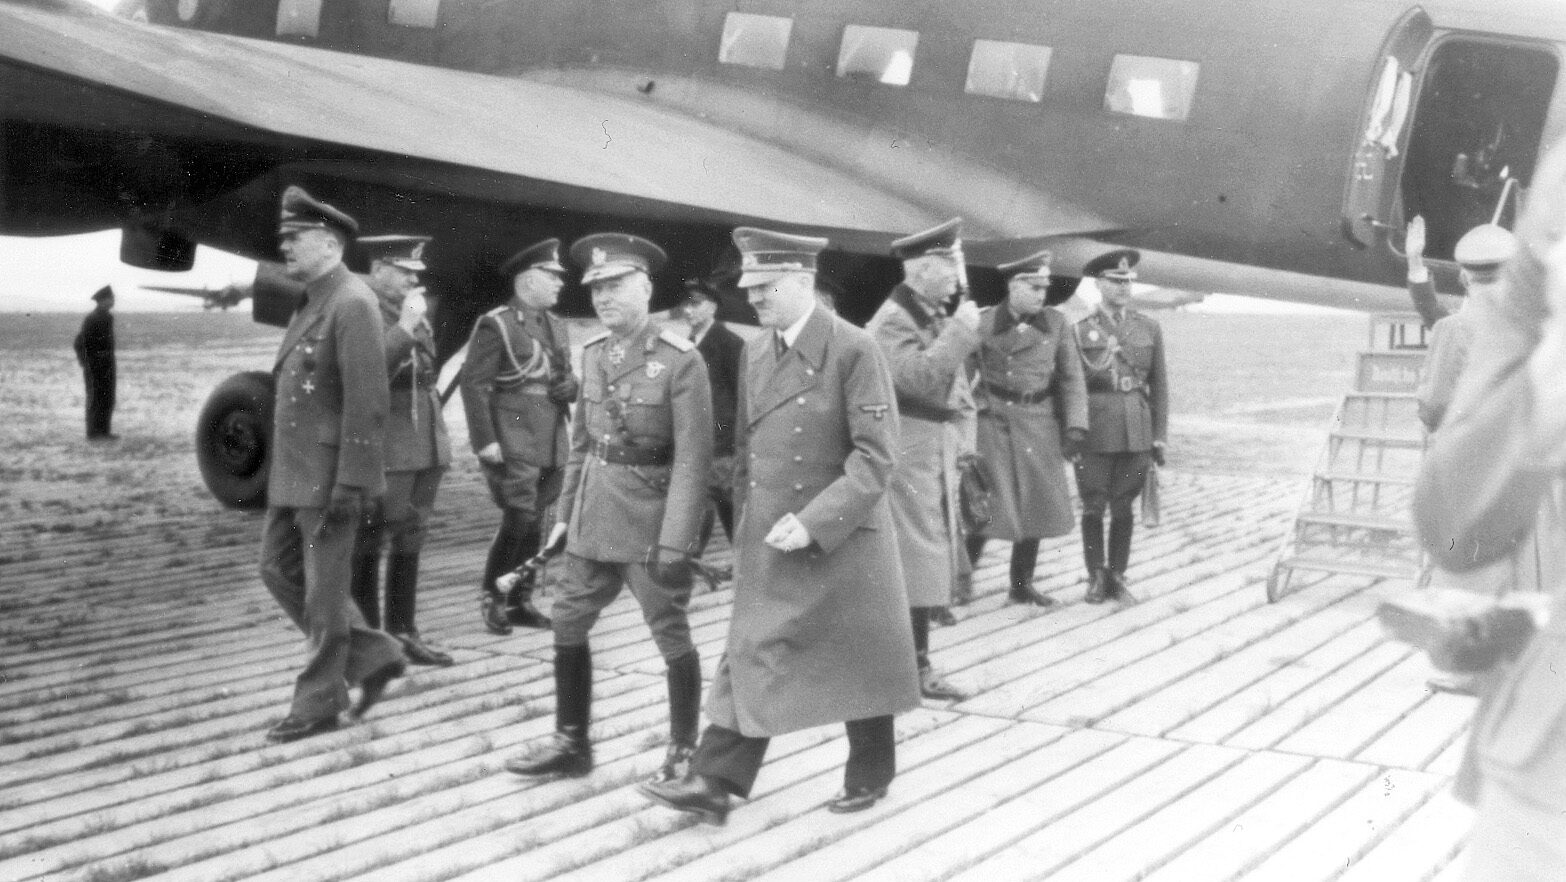 At Rangsdorf Airfield near Hitler’s headquarters at Rastenburg, East Prussia, the Führer and Romanian Marshal Ion Antonescu walk away from a Focke Wulf Condor piloted by Baur.